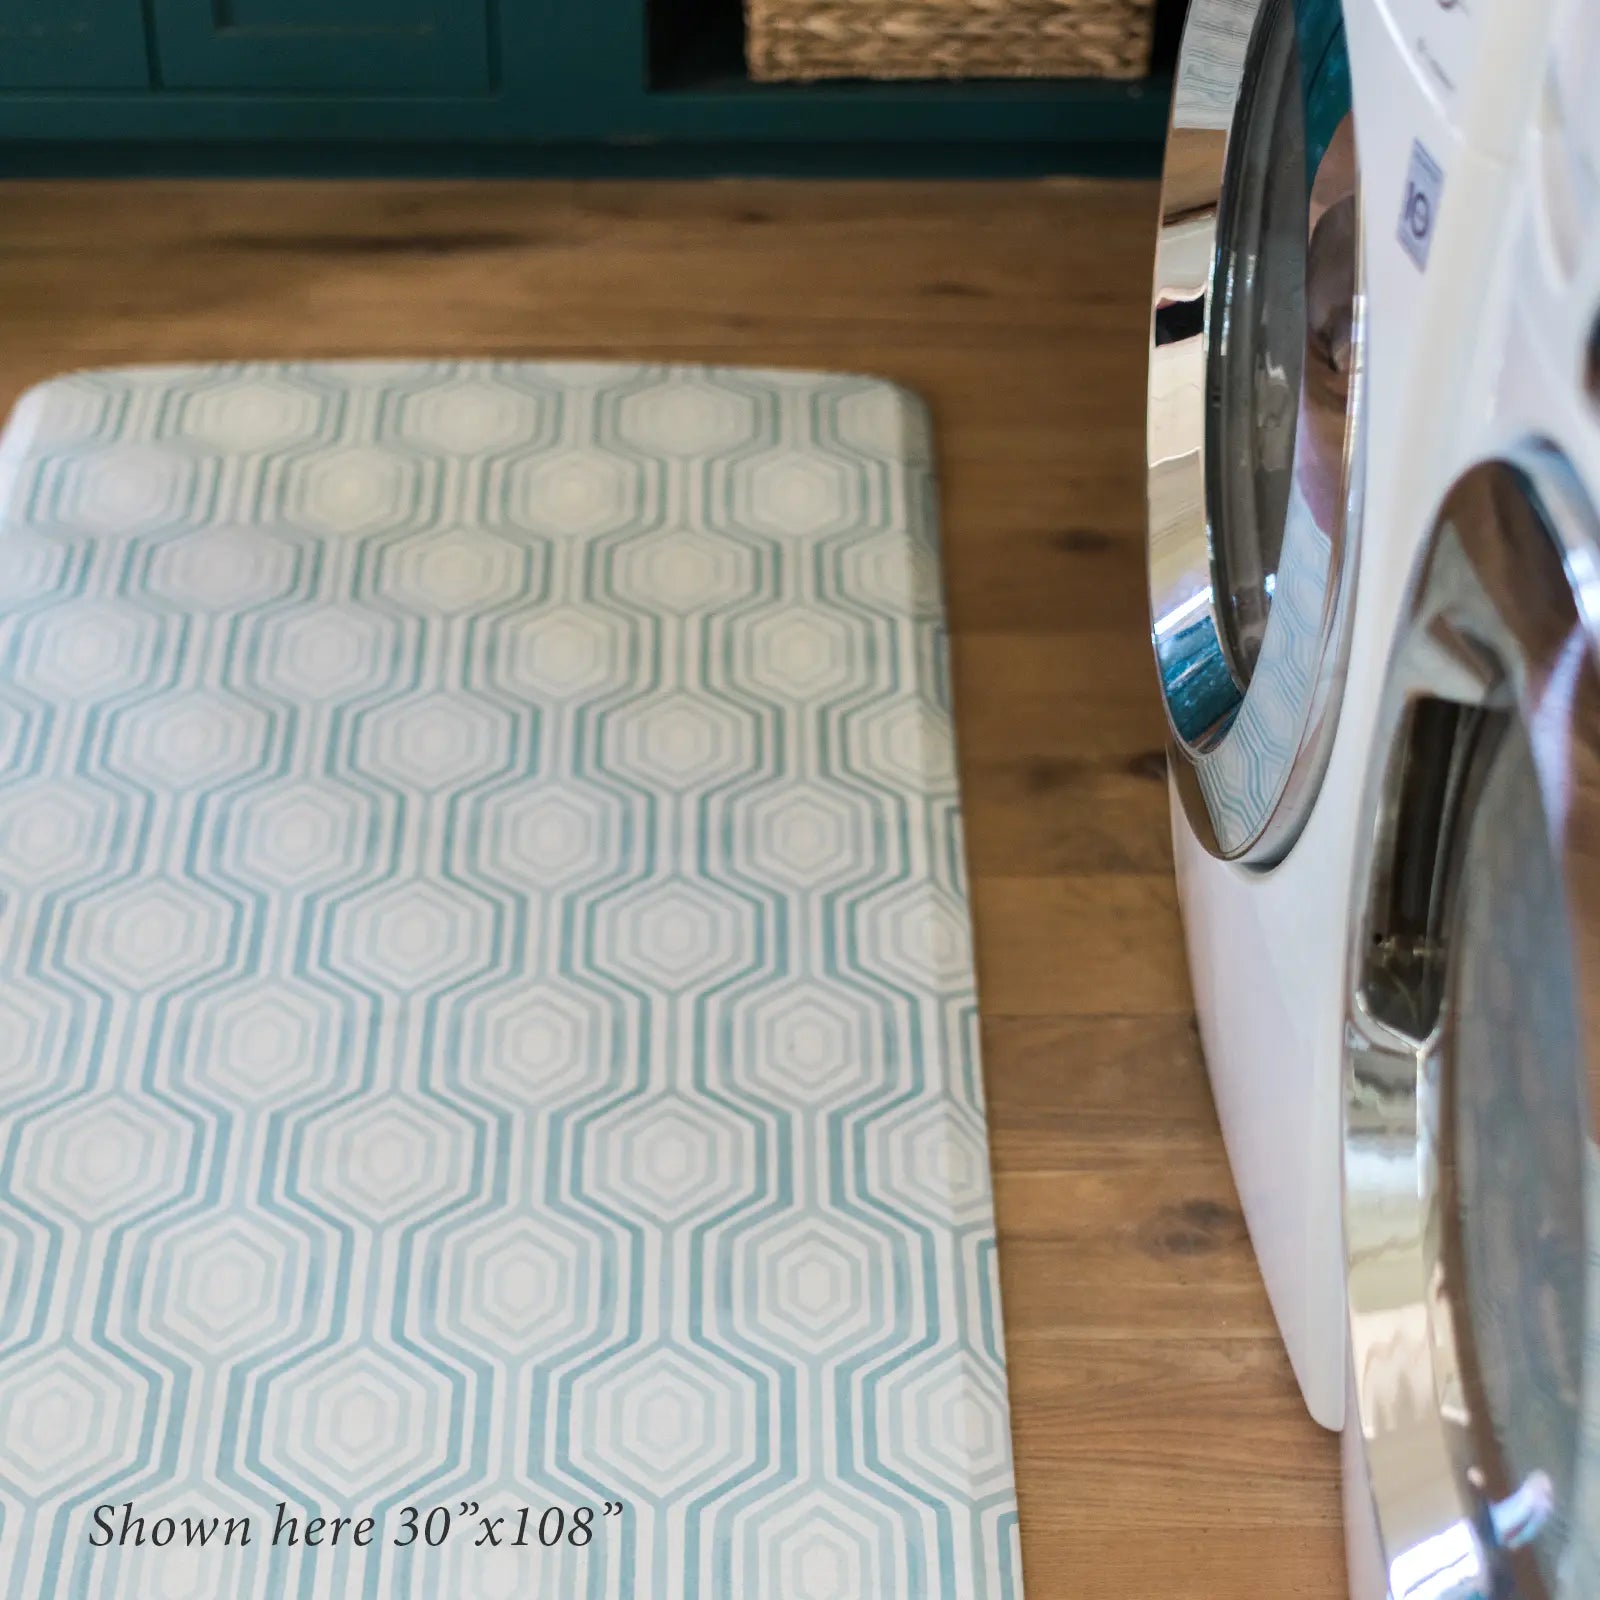 Blake waves blue and white mod preppy geometric print kitchen mat shown in size 30x108 in front of washer and dryer in laundry room.